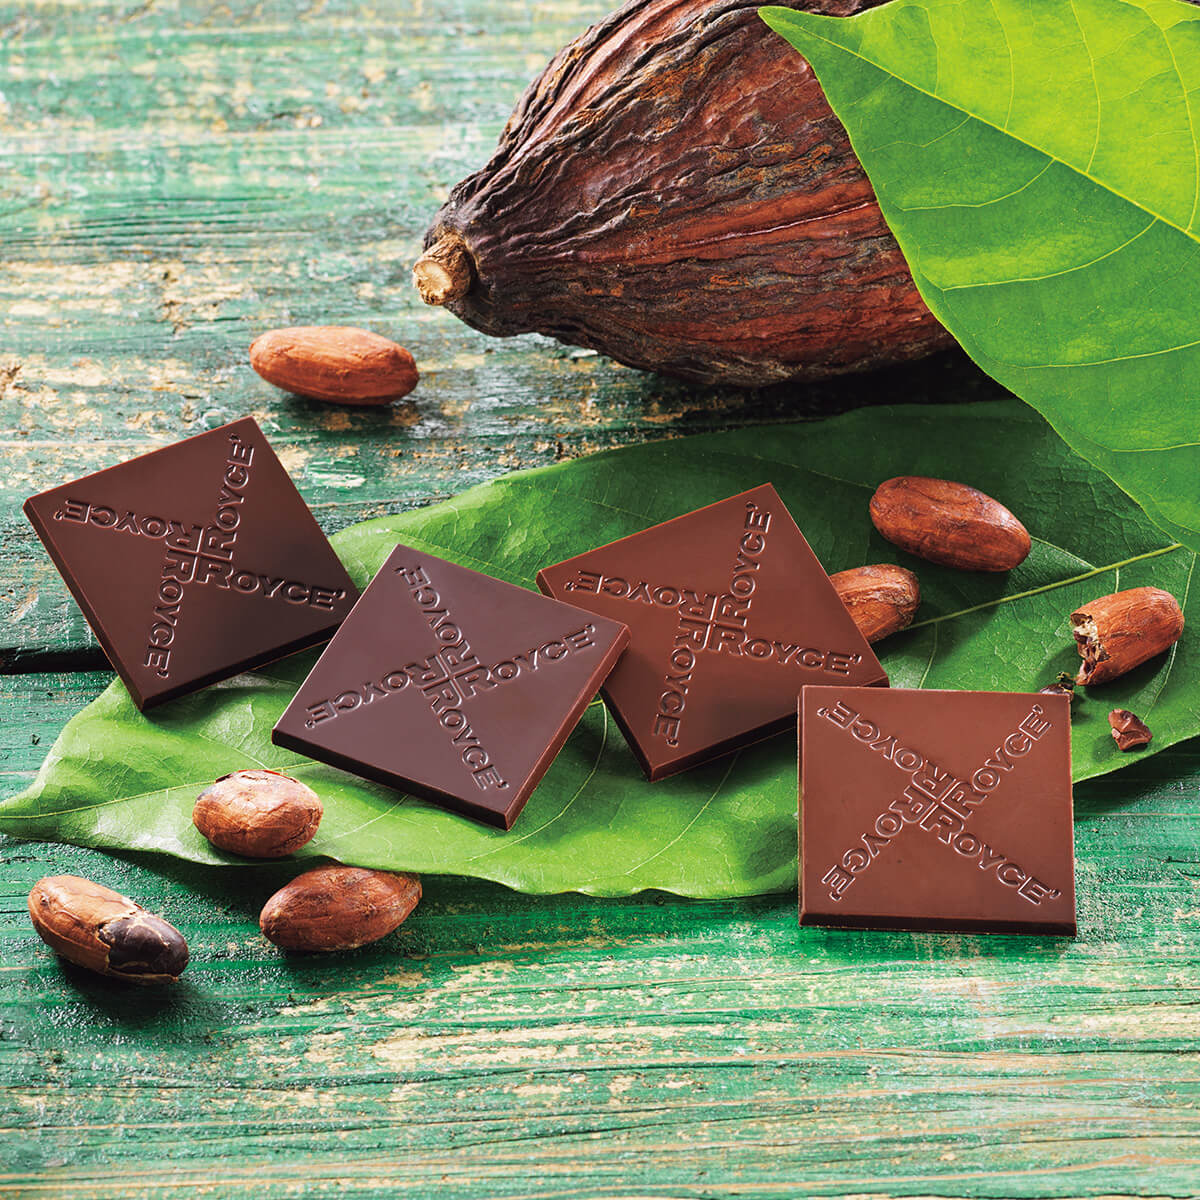 ROYCE' Chocolate - Image shows chocolate squares with the words ROYCE' etched on them. Accents include leaves, loose cacao beans, and a cacao pod.